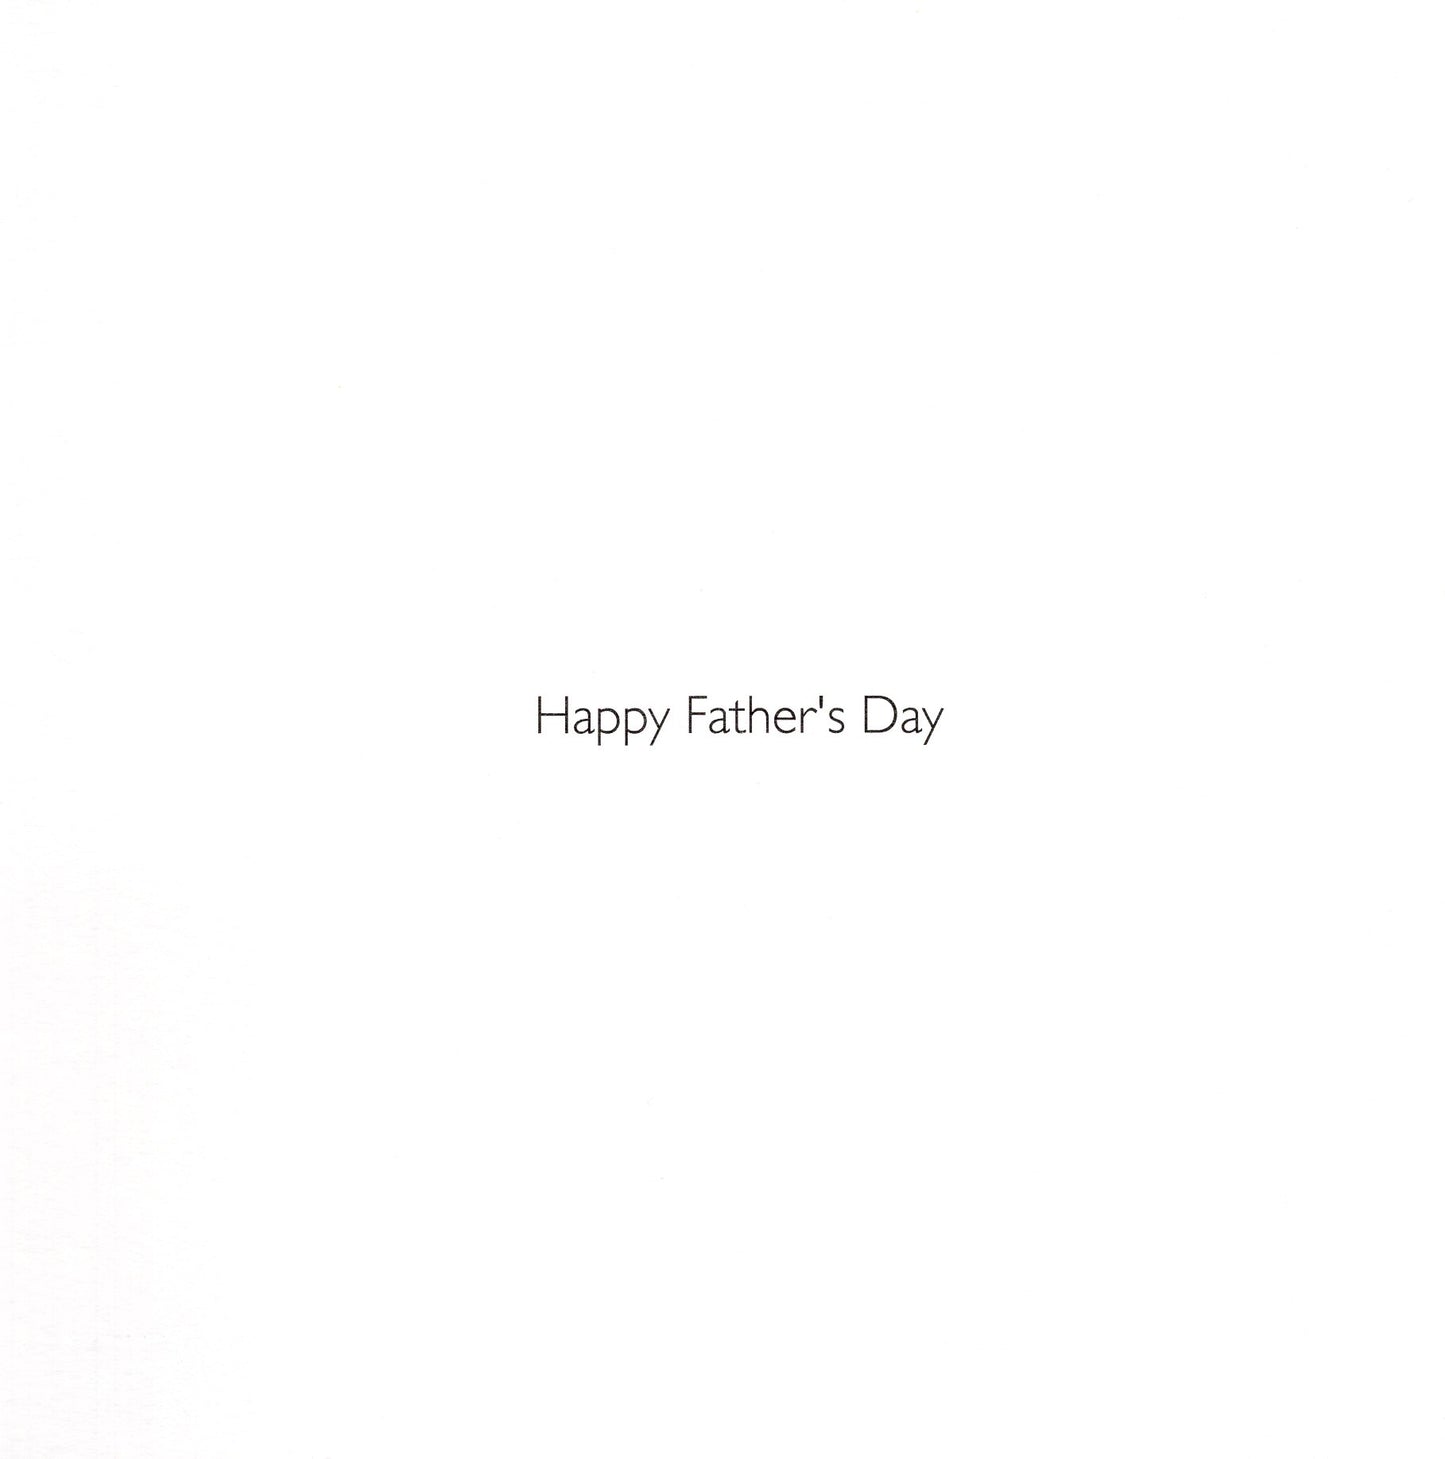 Dad From Your No.1 Fan Happy Father's Day Greeting Card